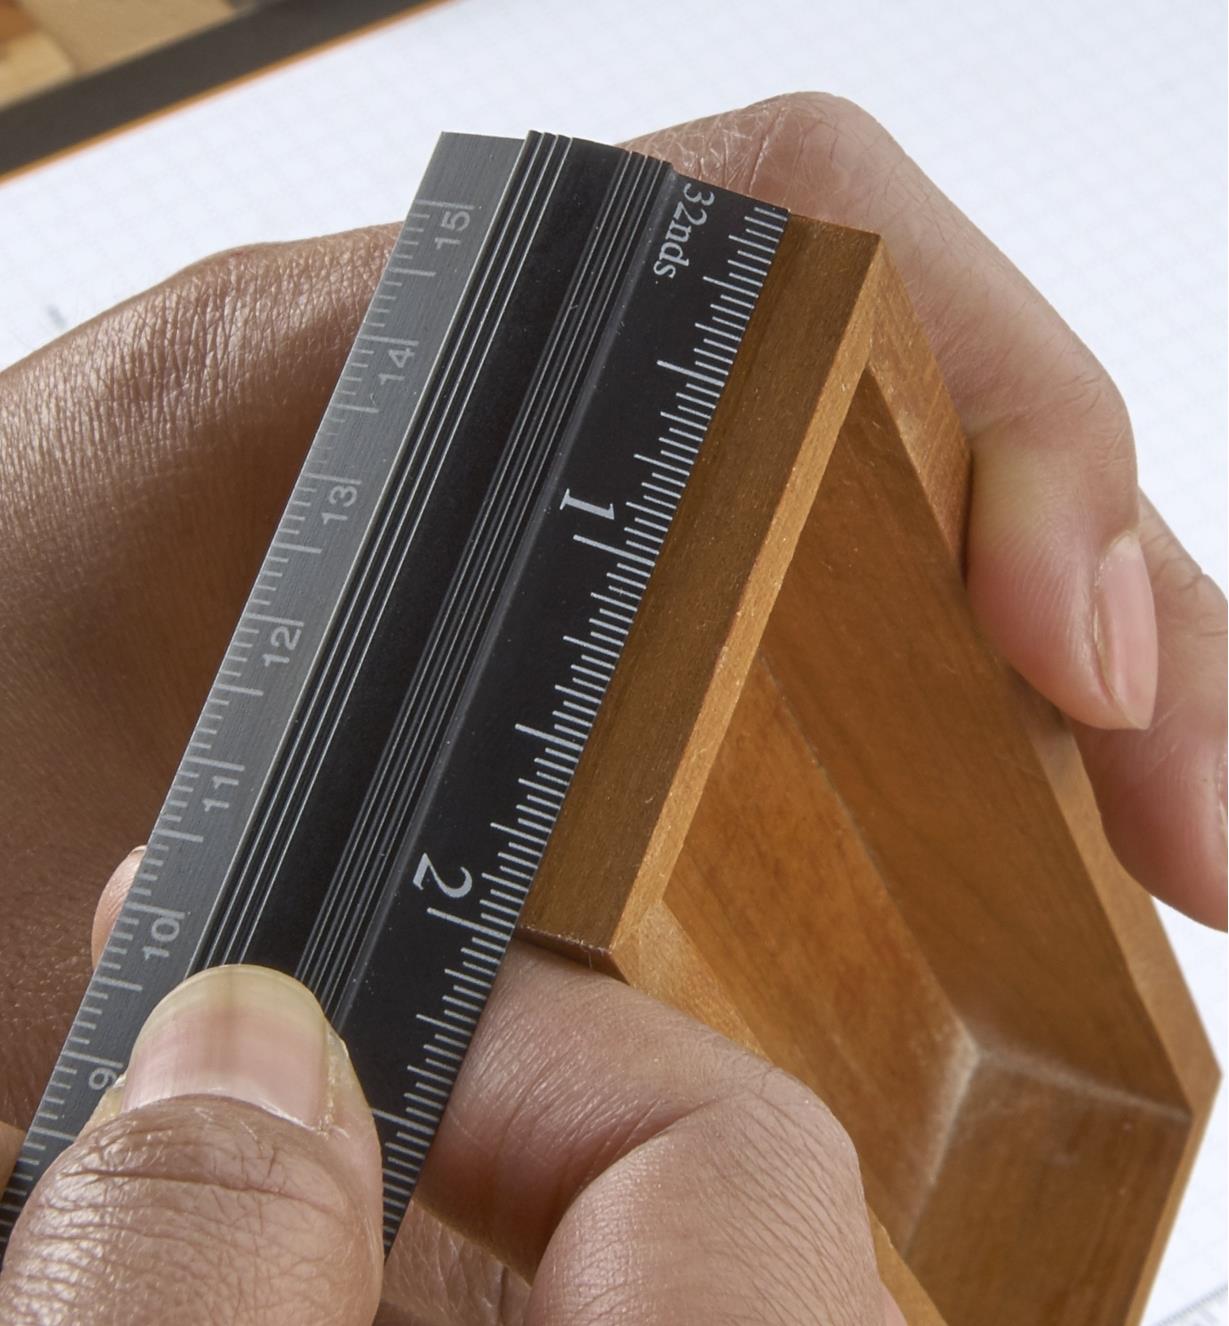 Using a Veritas bench rule to take measurements from a maquette of a box